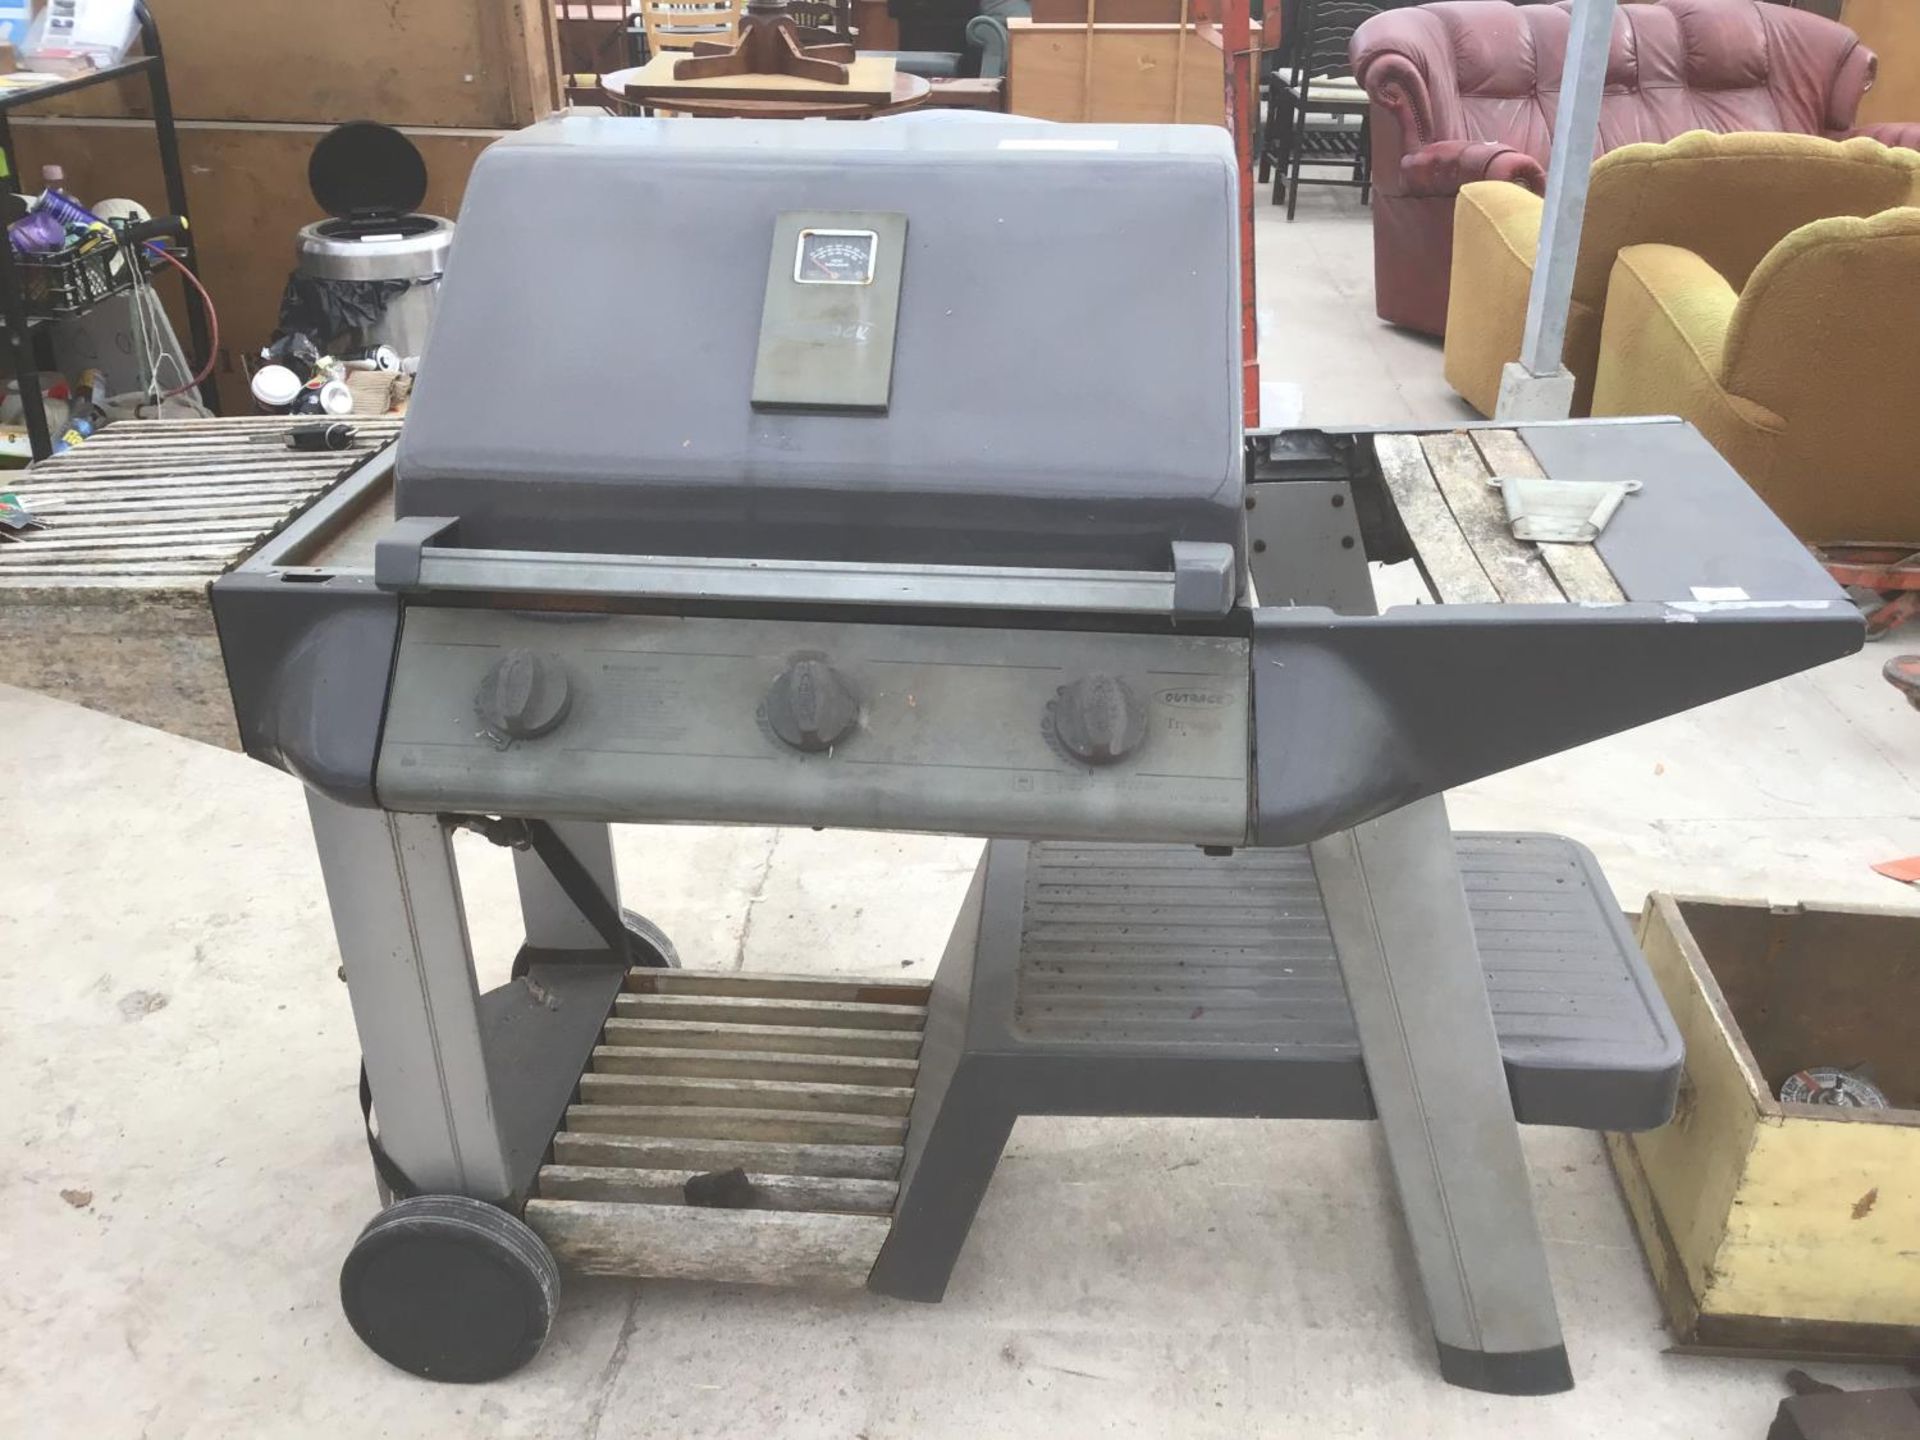 AN OUTBACK GAS BBQ